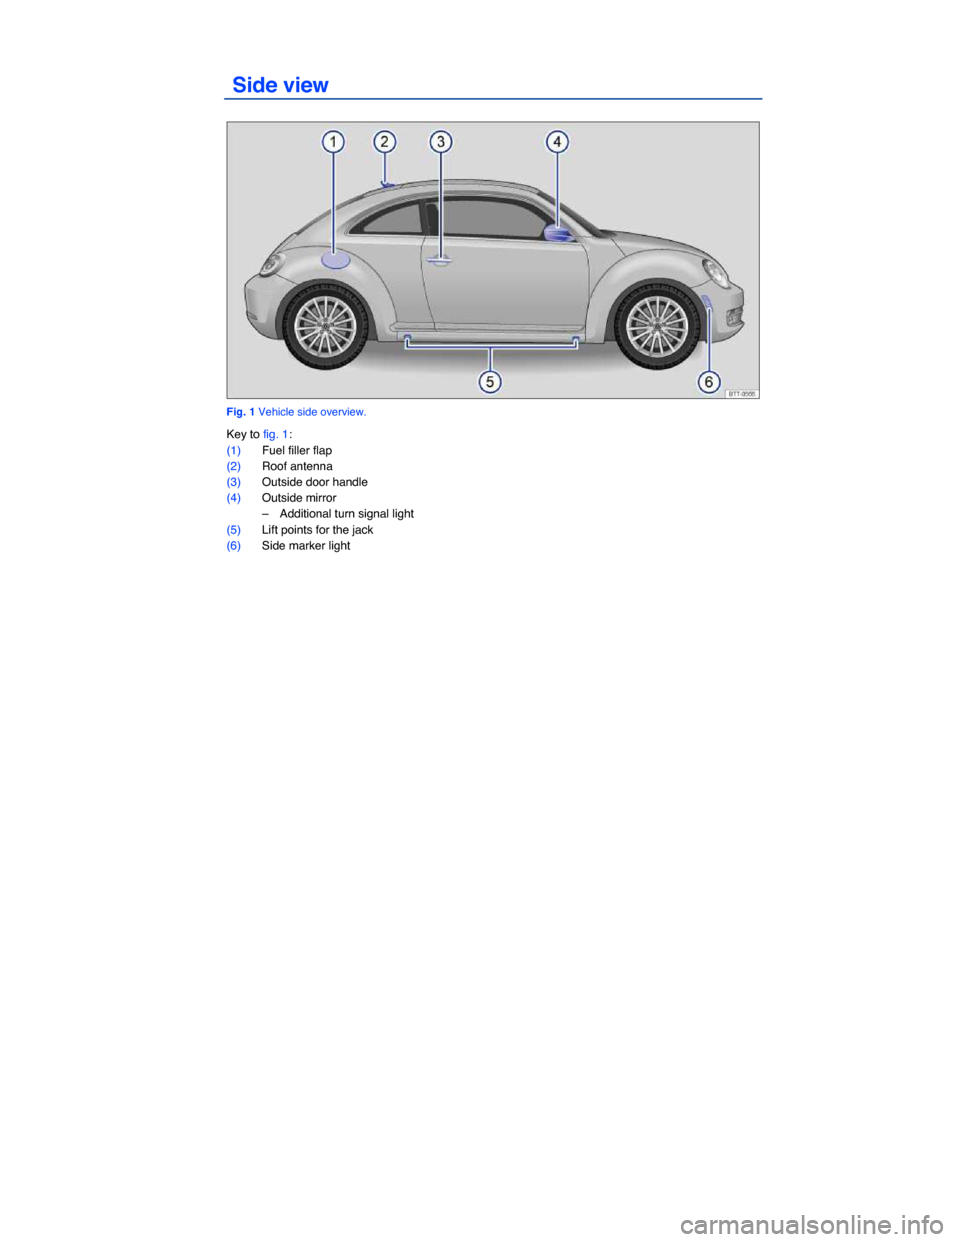 VOLKSWAGEN BEETLE 2015 3.G Owners Manual  
 Side view 
 
Fig. 1 Vehicle side overview. 
Key to fig. 1: 
(1) Fuel filler flap  
(2) Roof antenna                                                                                                  